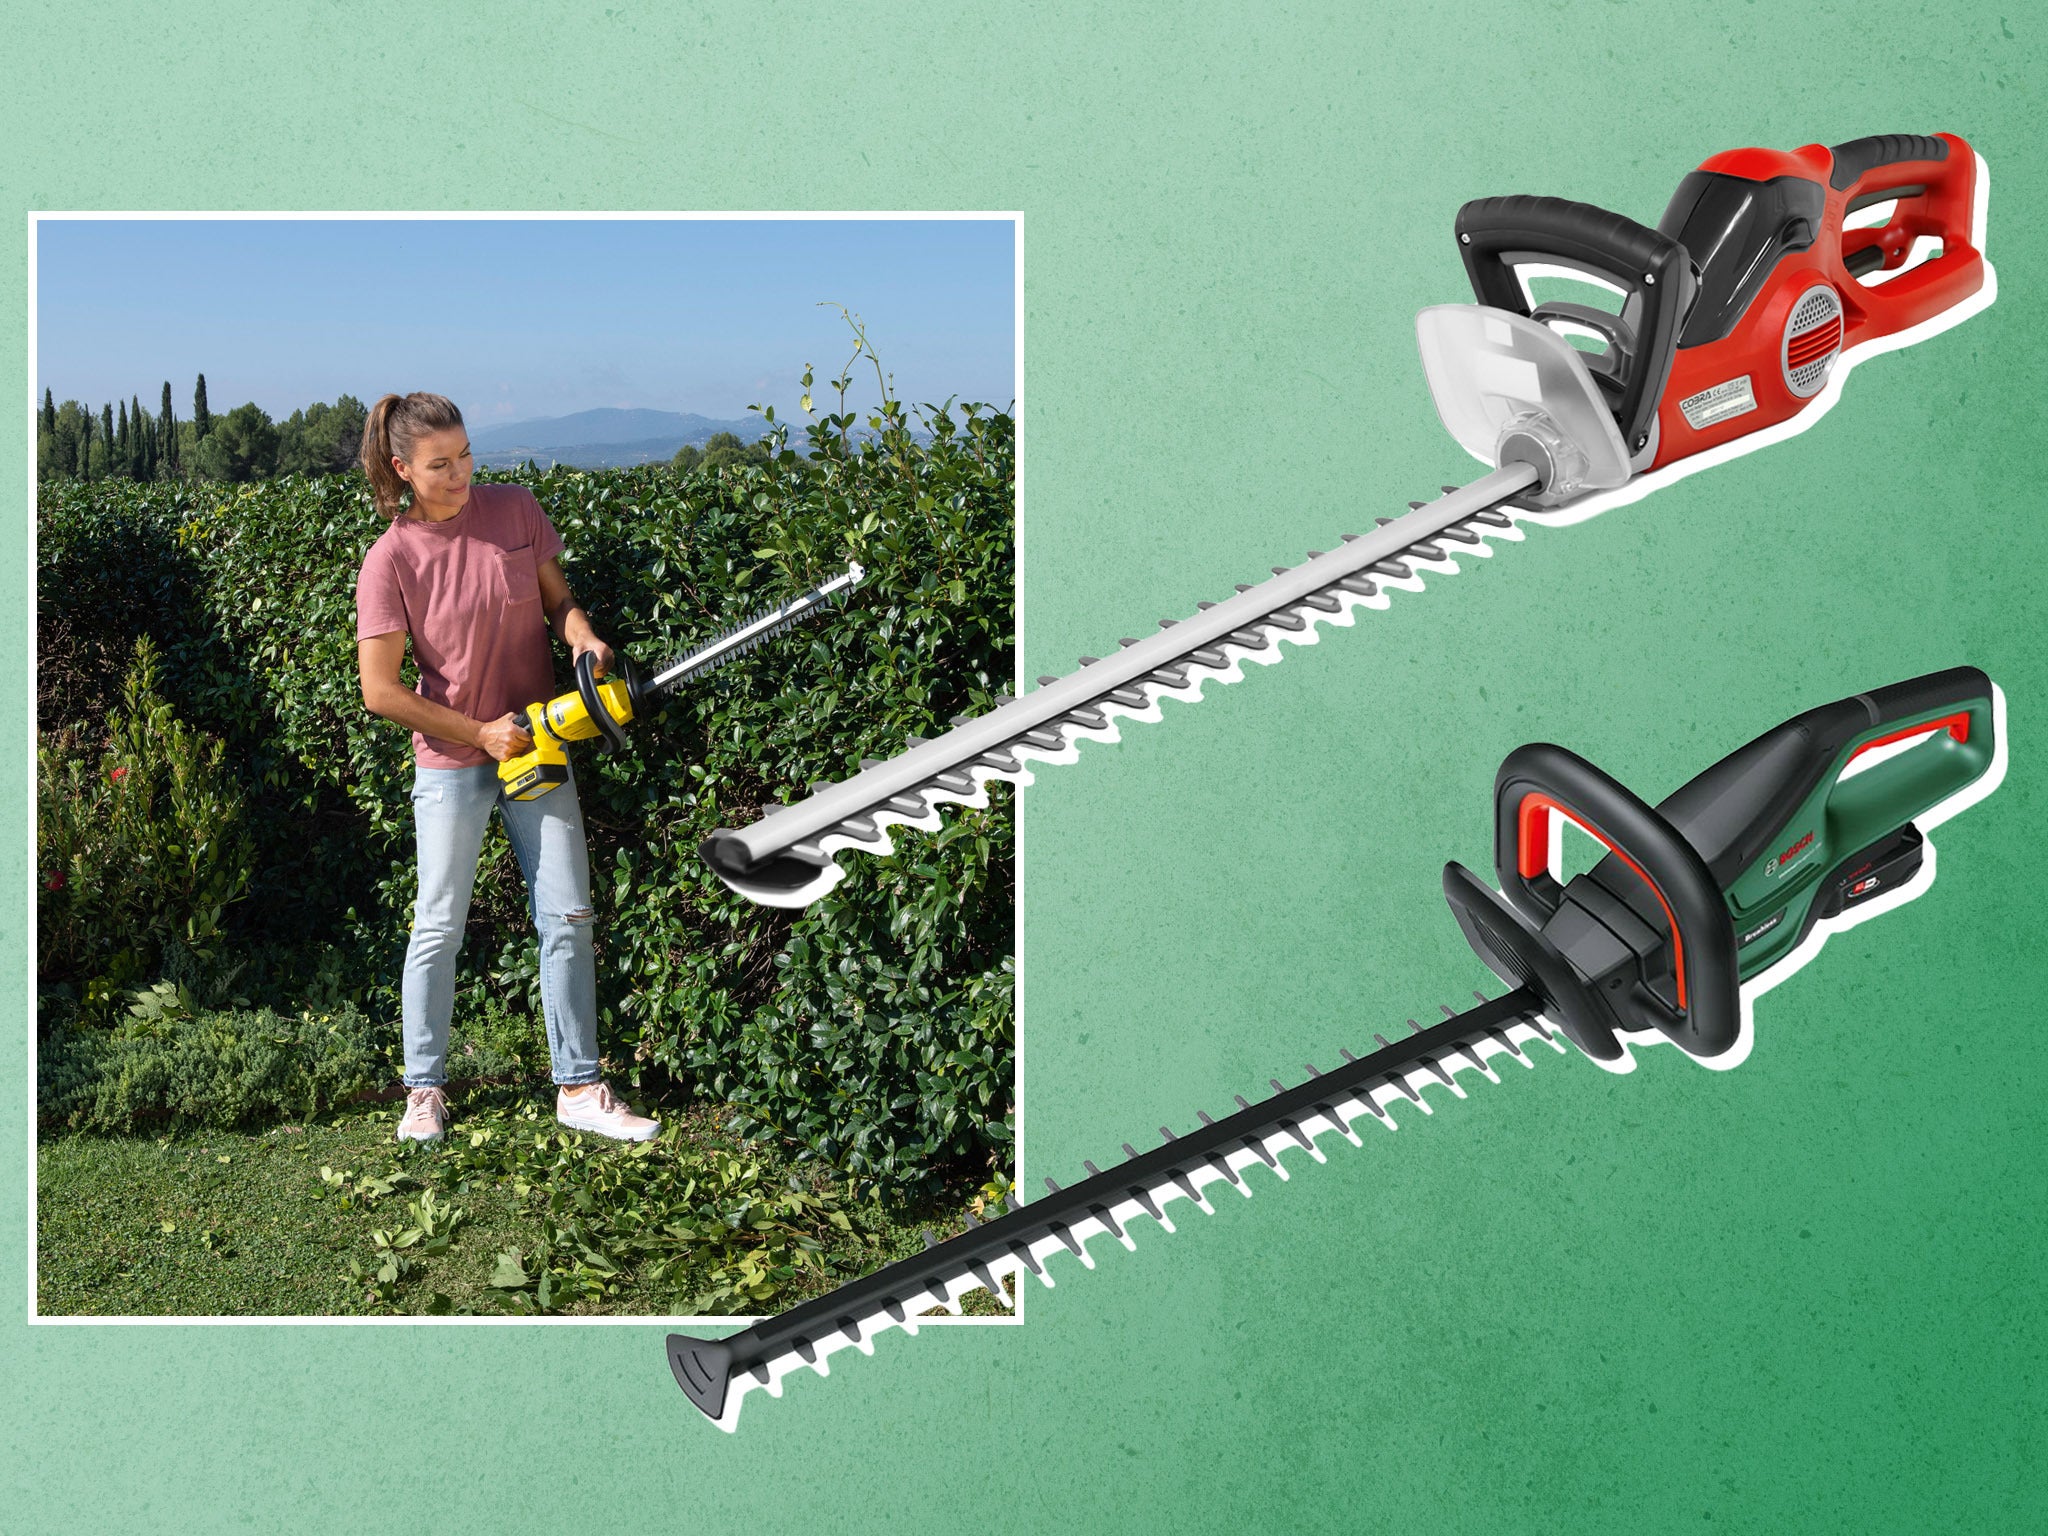 https://static.independent.co.uk/2023/06/14/14/best%20hedge%20trimmers%20indybest.jpg